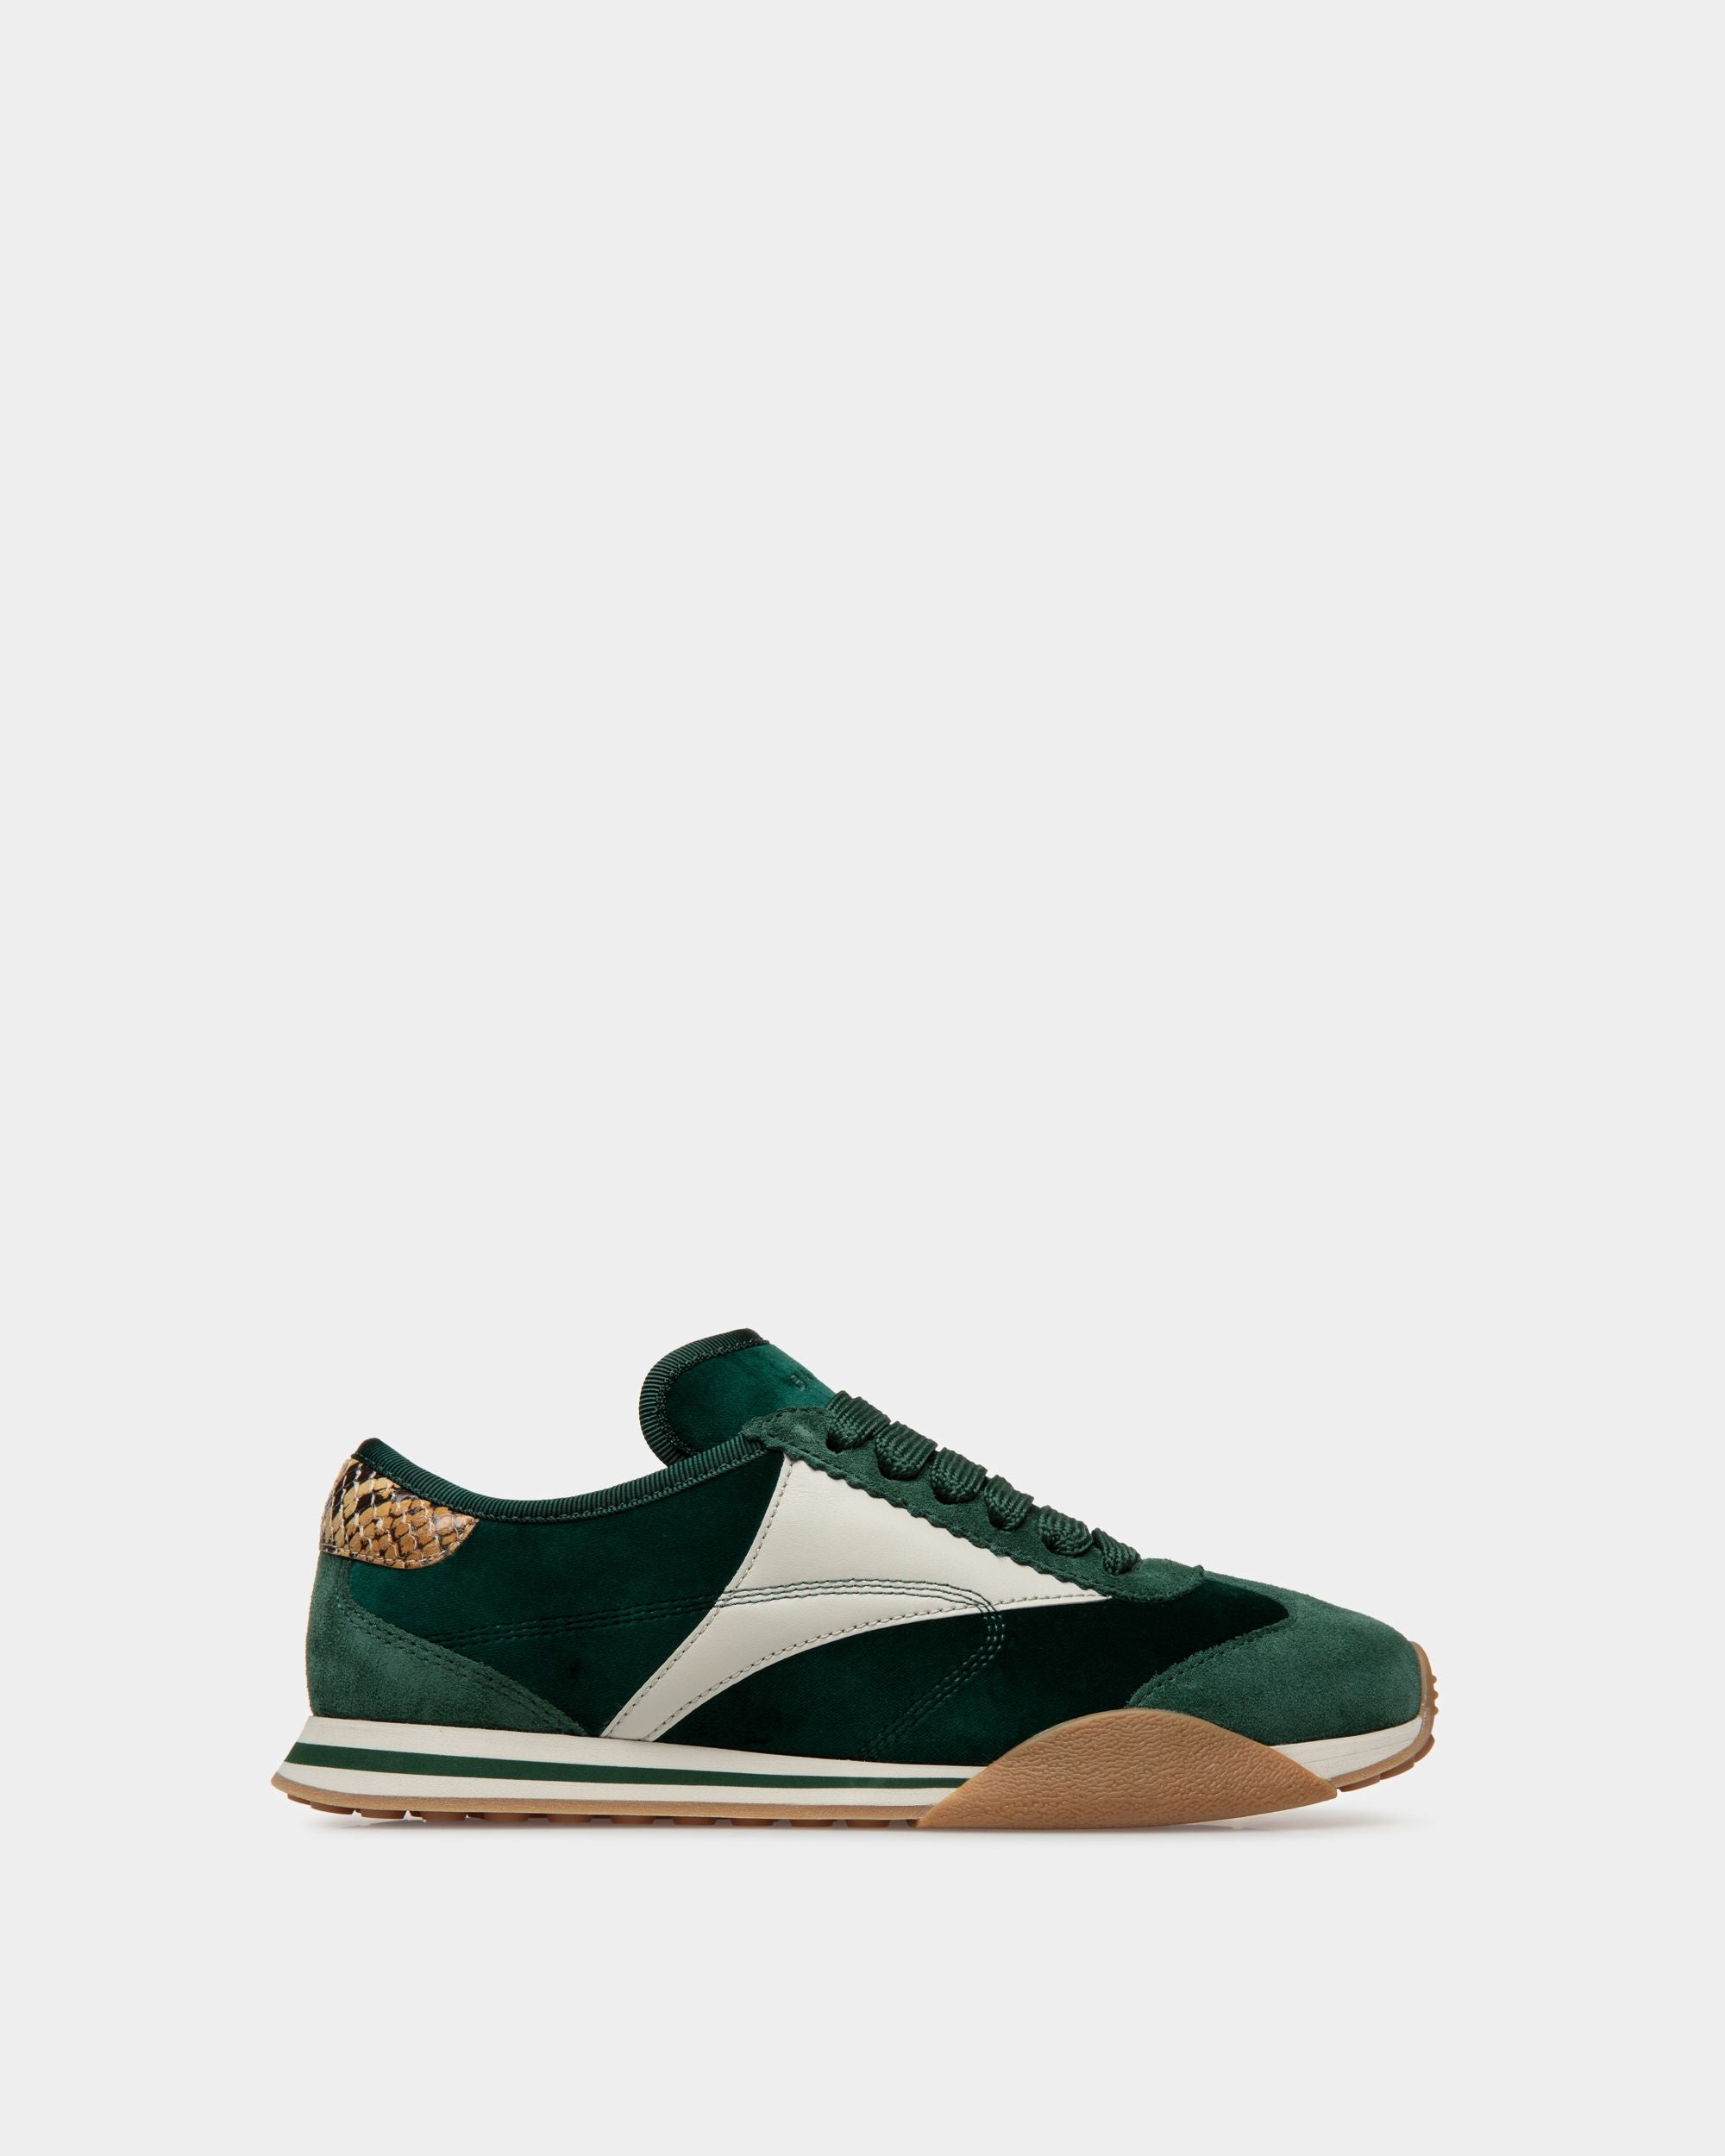 Sonney | Women's Sneakers | Peppermint And Dusty White Leather And Cotton | Bally | Still Life Side